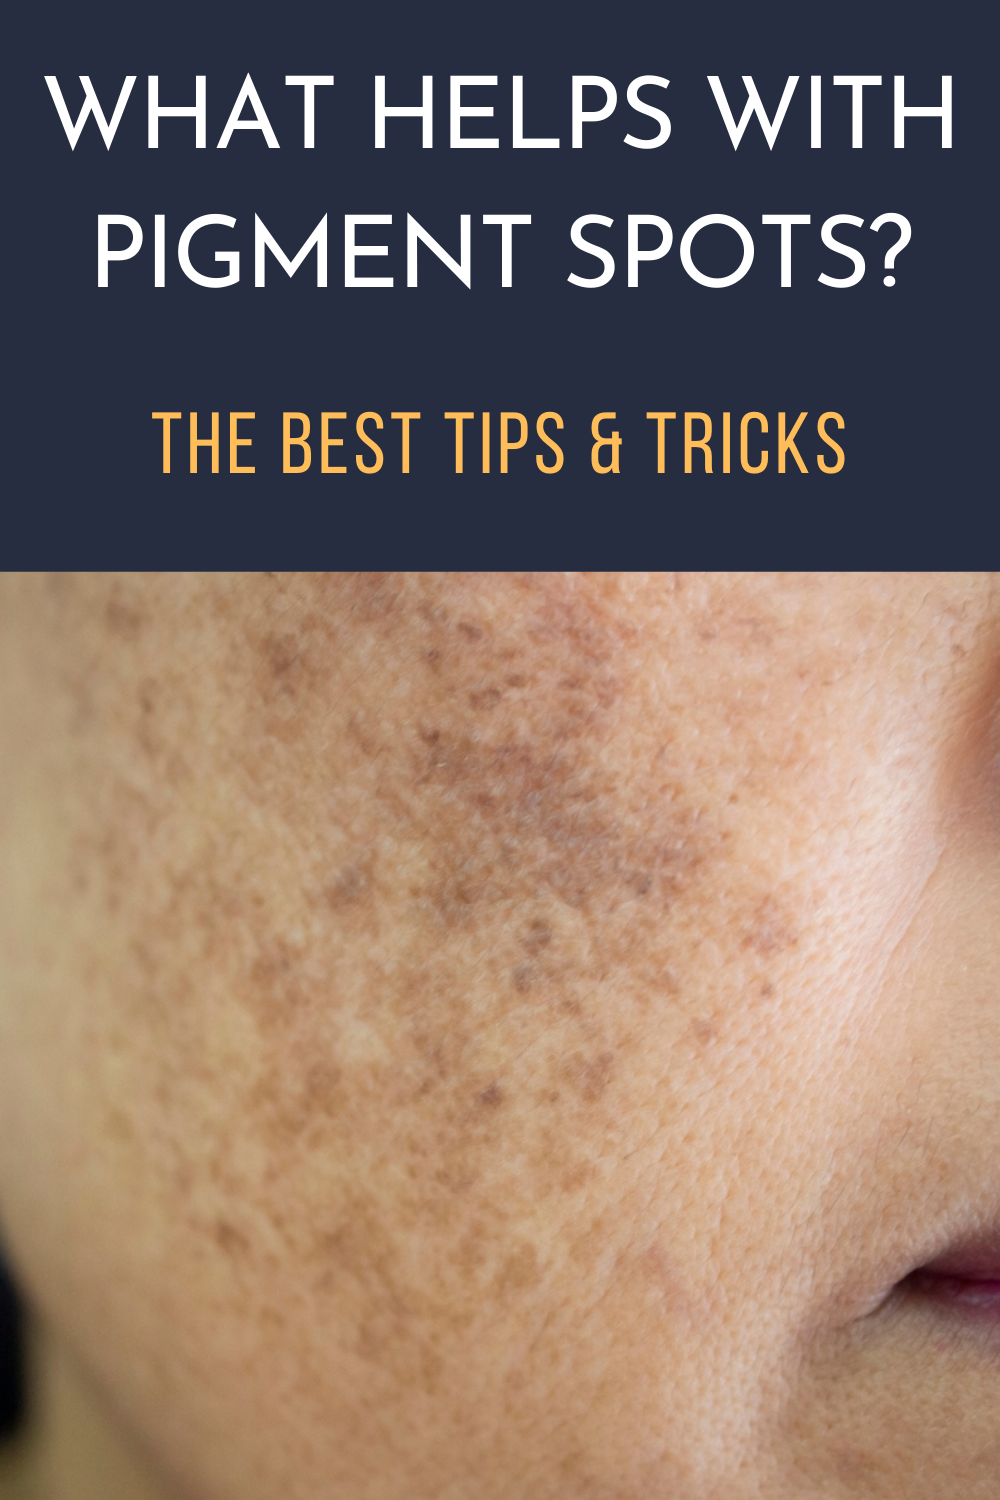 What Helps with Pigment Spots? The Best Tips & Tricks